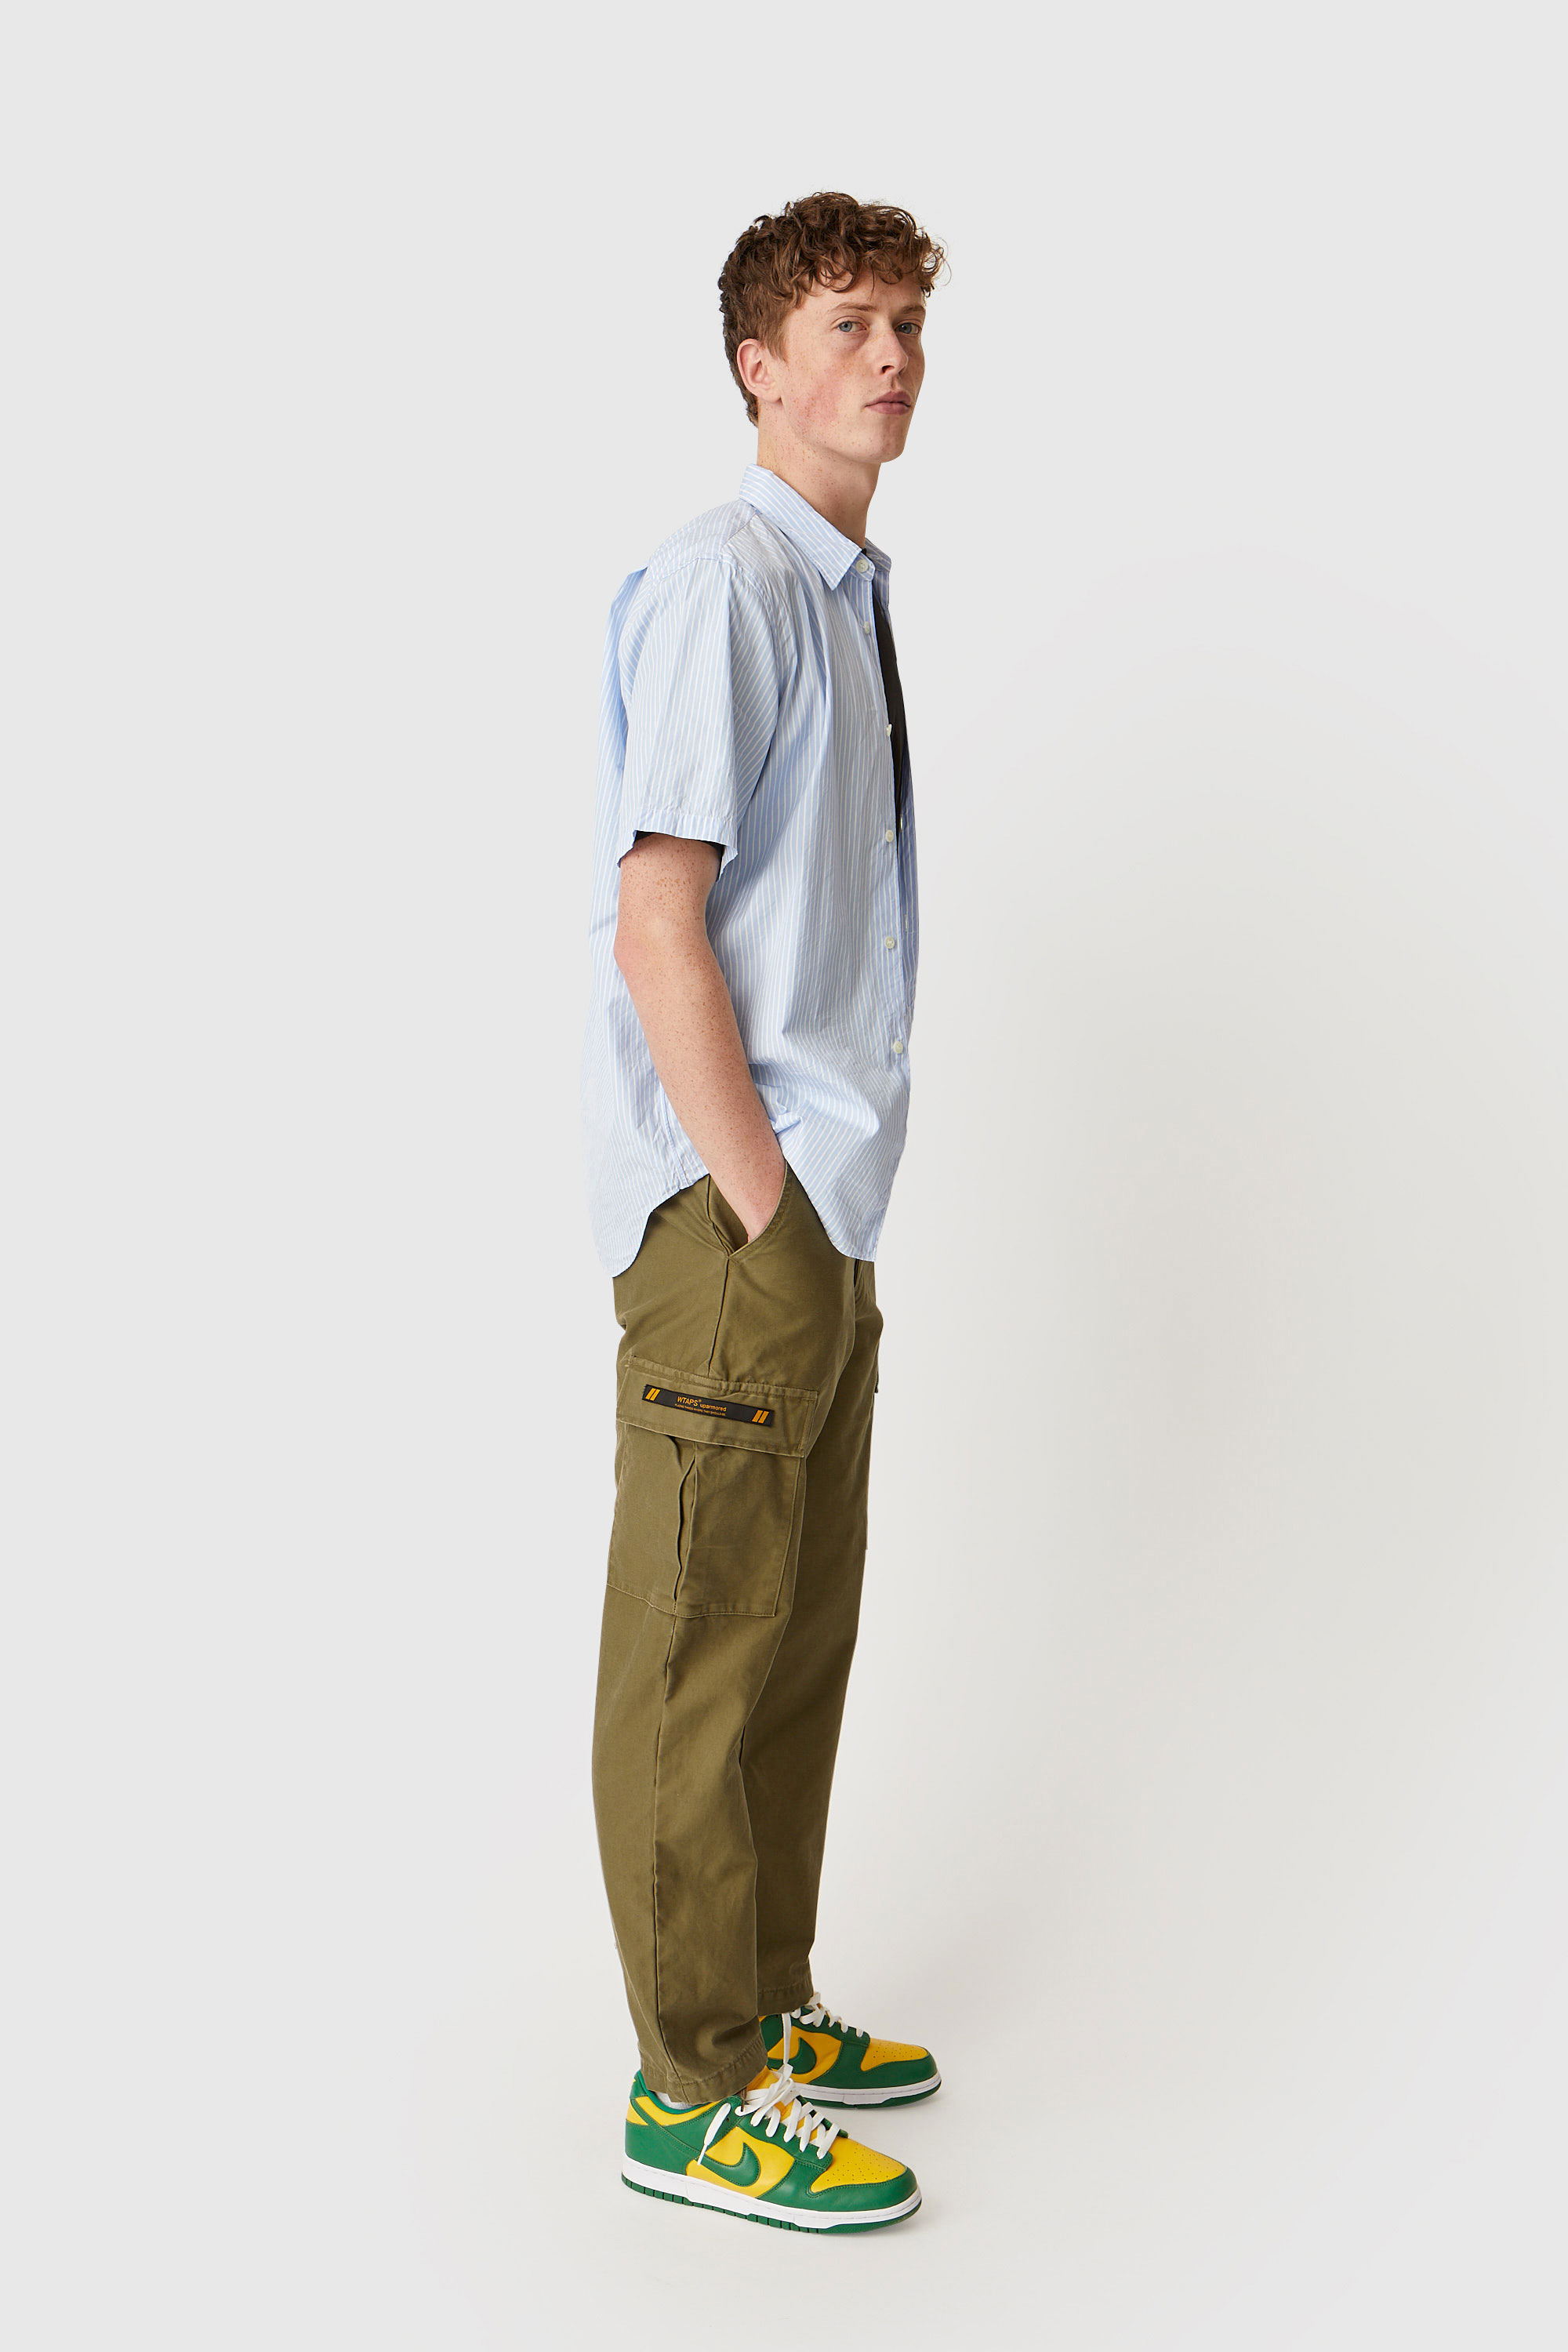 WTAPS Jungle Stock Trousers 04olive